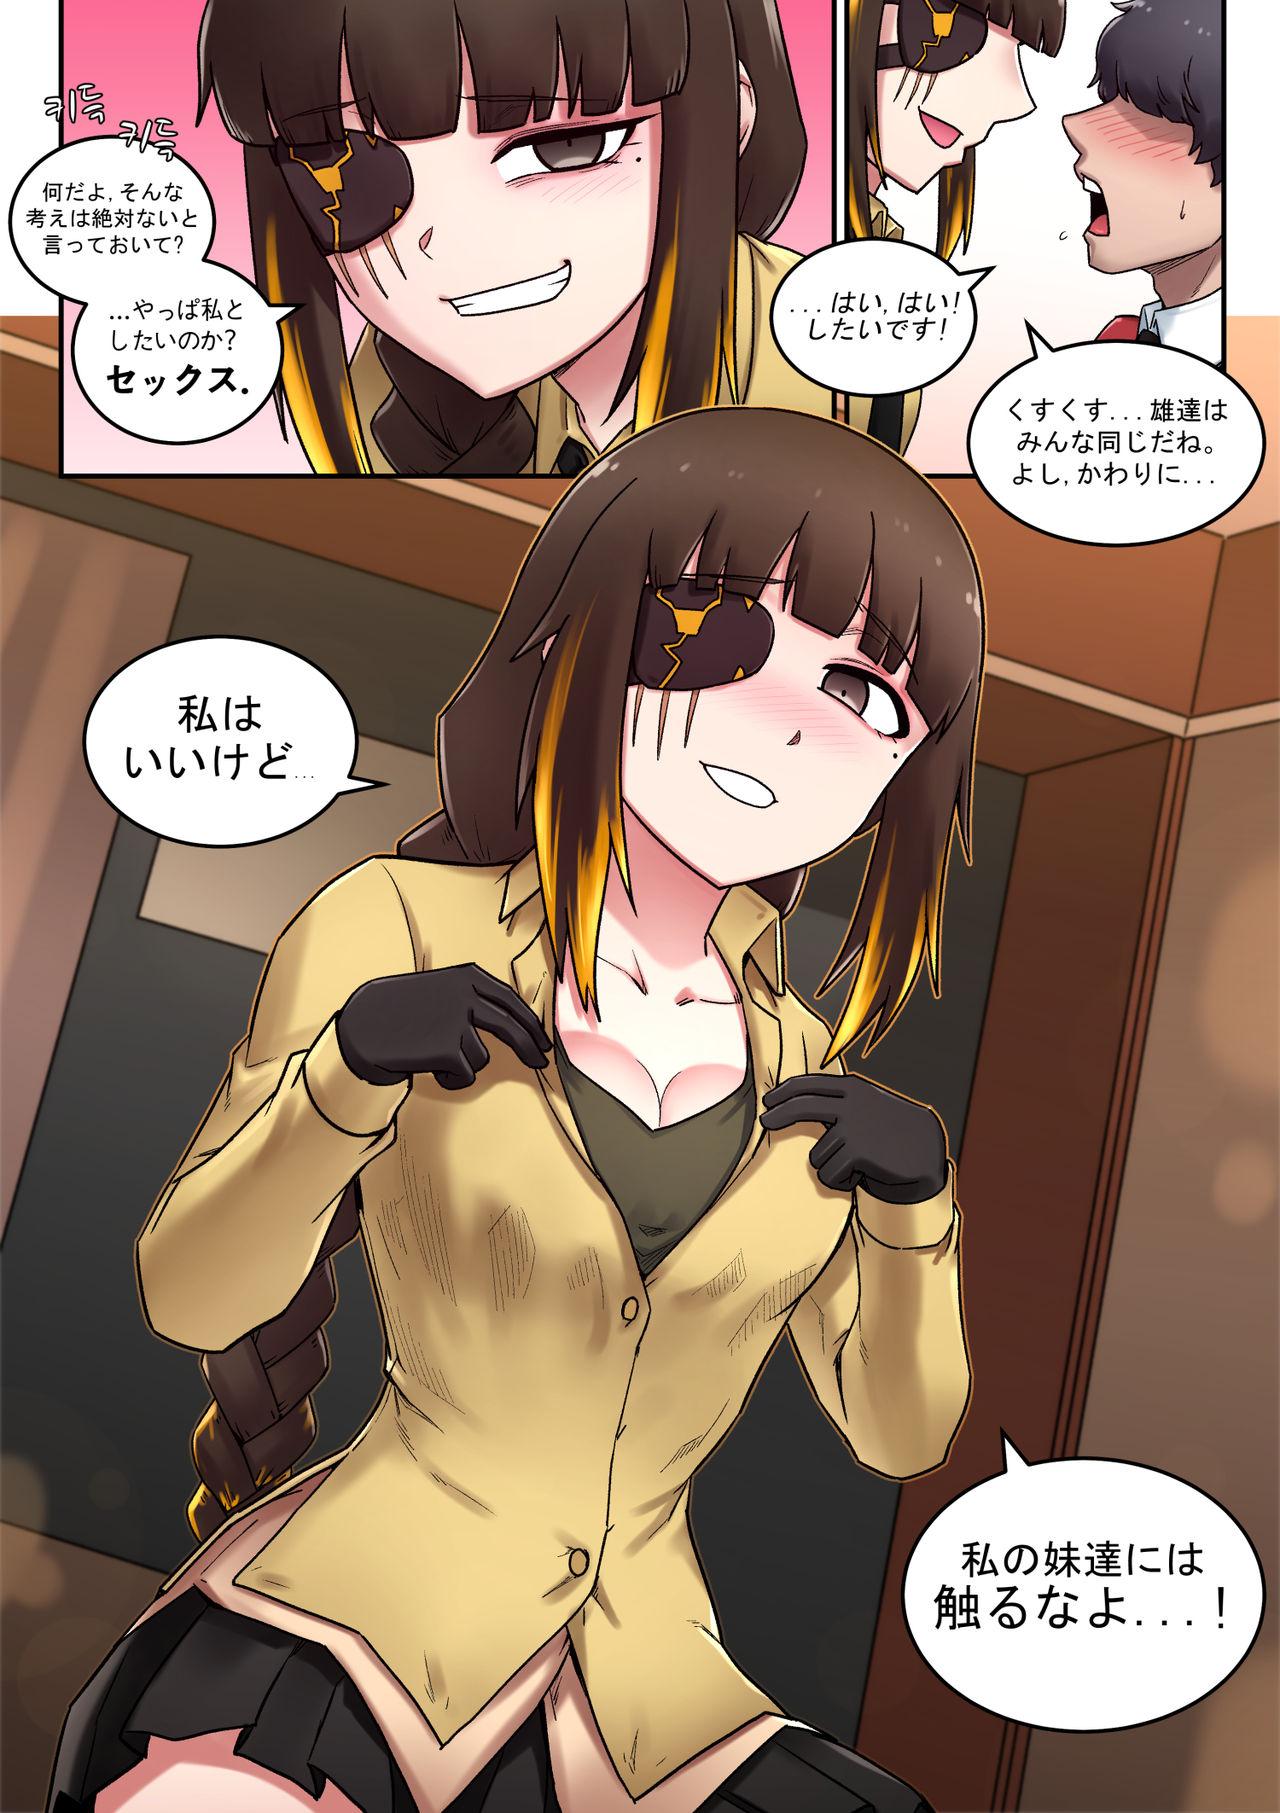 Adult Toys M16 COMIC - Girls frontline Lingerie - Page 5